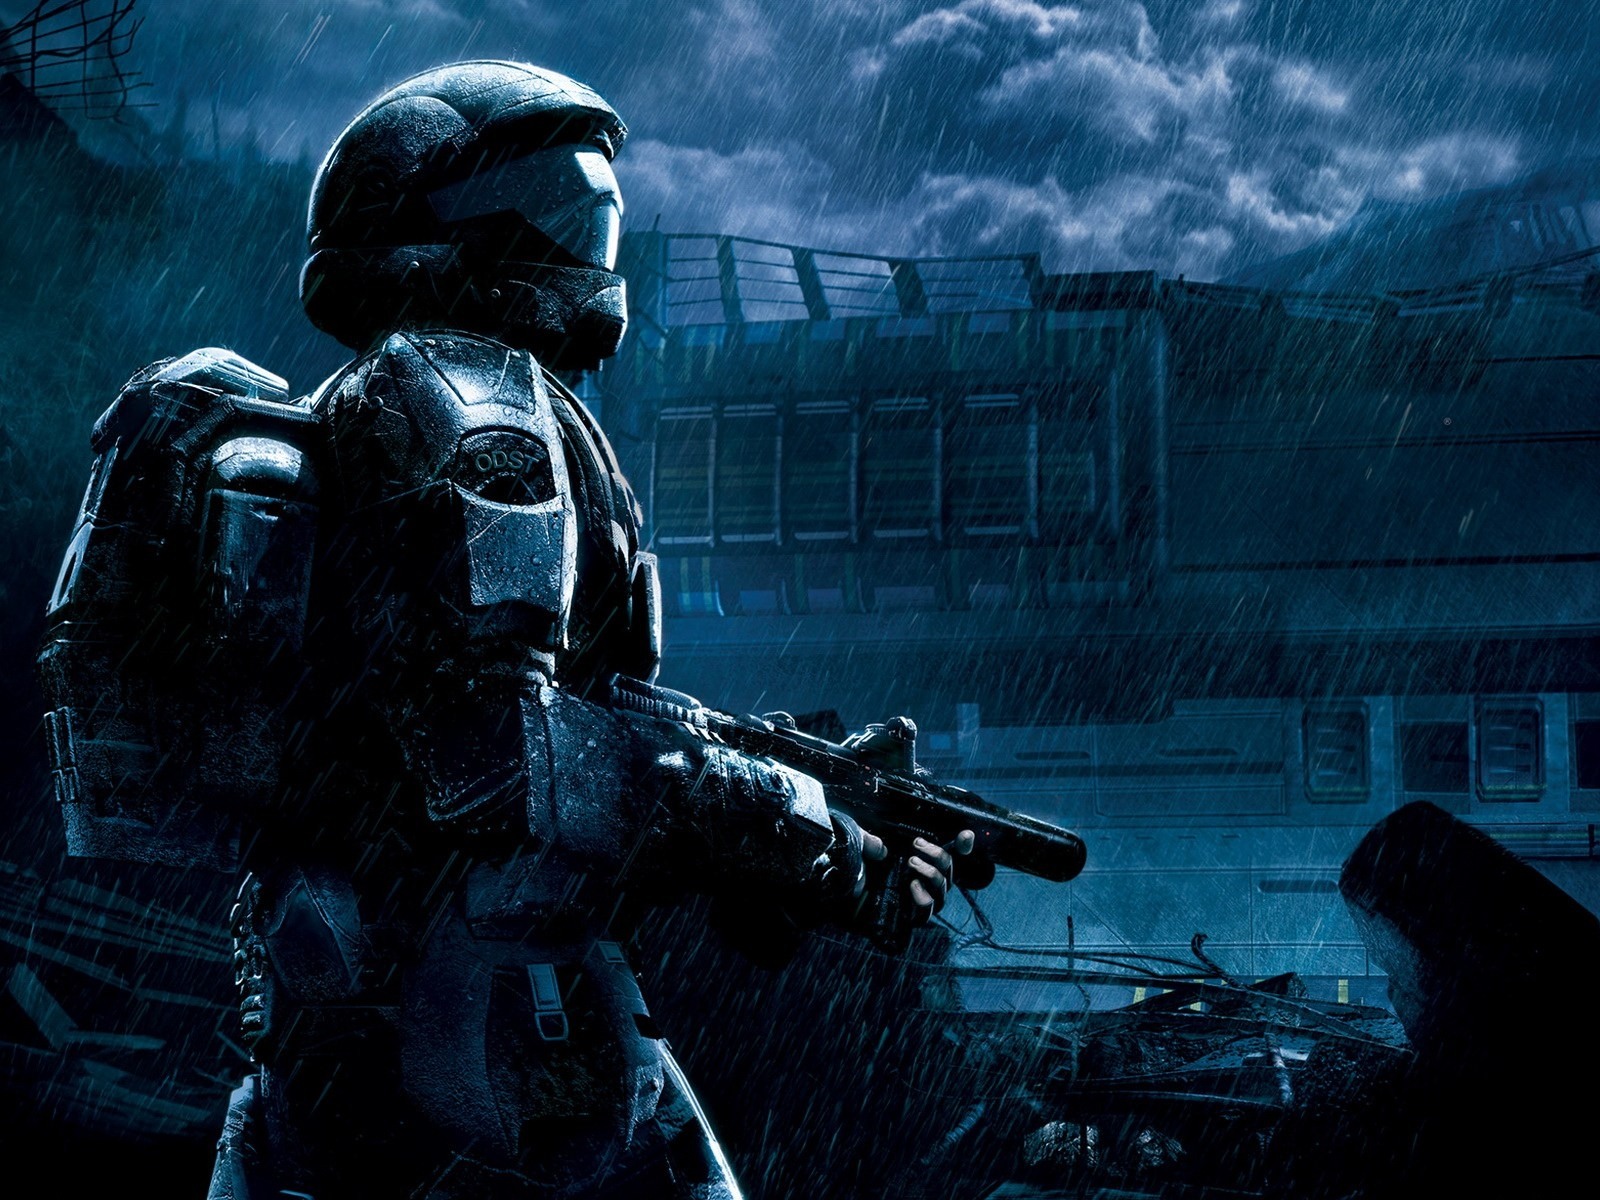 Halo game HD wallpapers #5 - 1600x1200